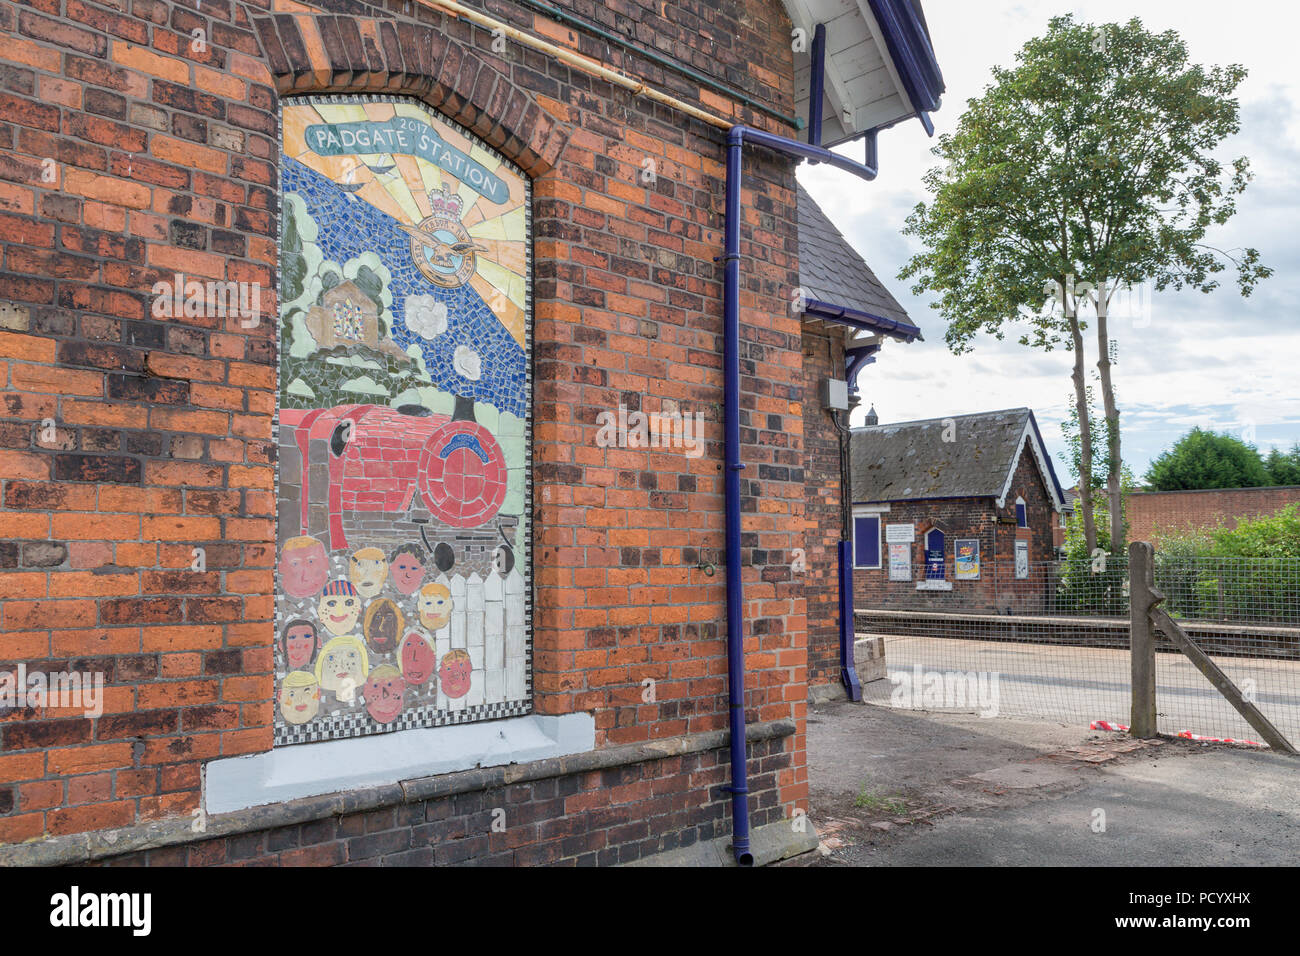 A no longer used window has been decoratively pictured with a mosaic of The Christchurch Express train at the Historic Railway Station of Padgate, War Stock Photo